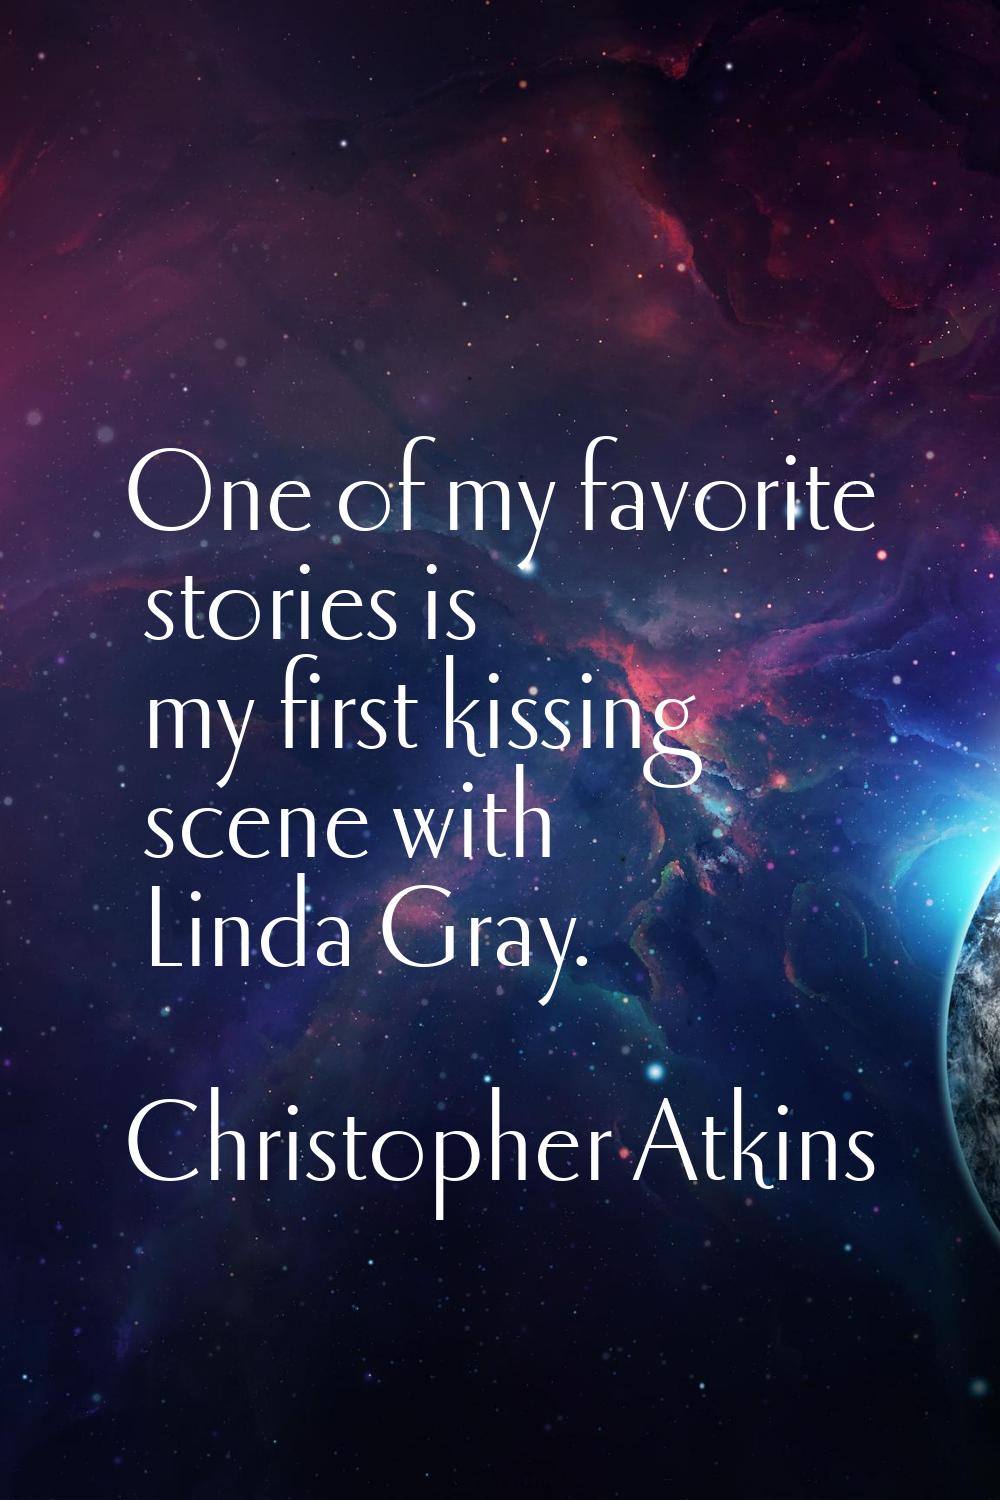 One of my favorite stories is my first kissing scene with Linda Gray.